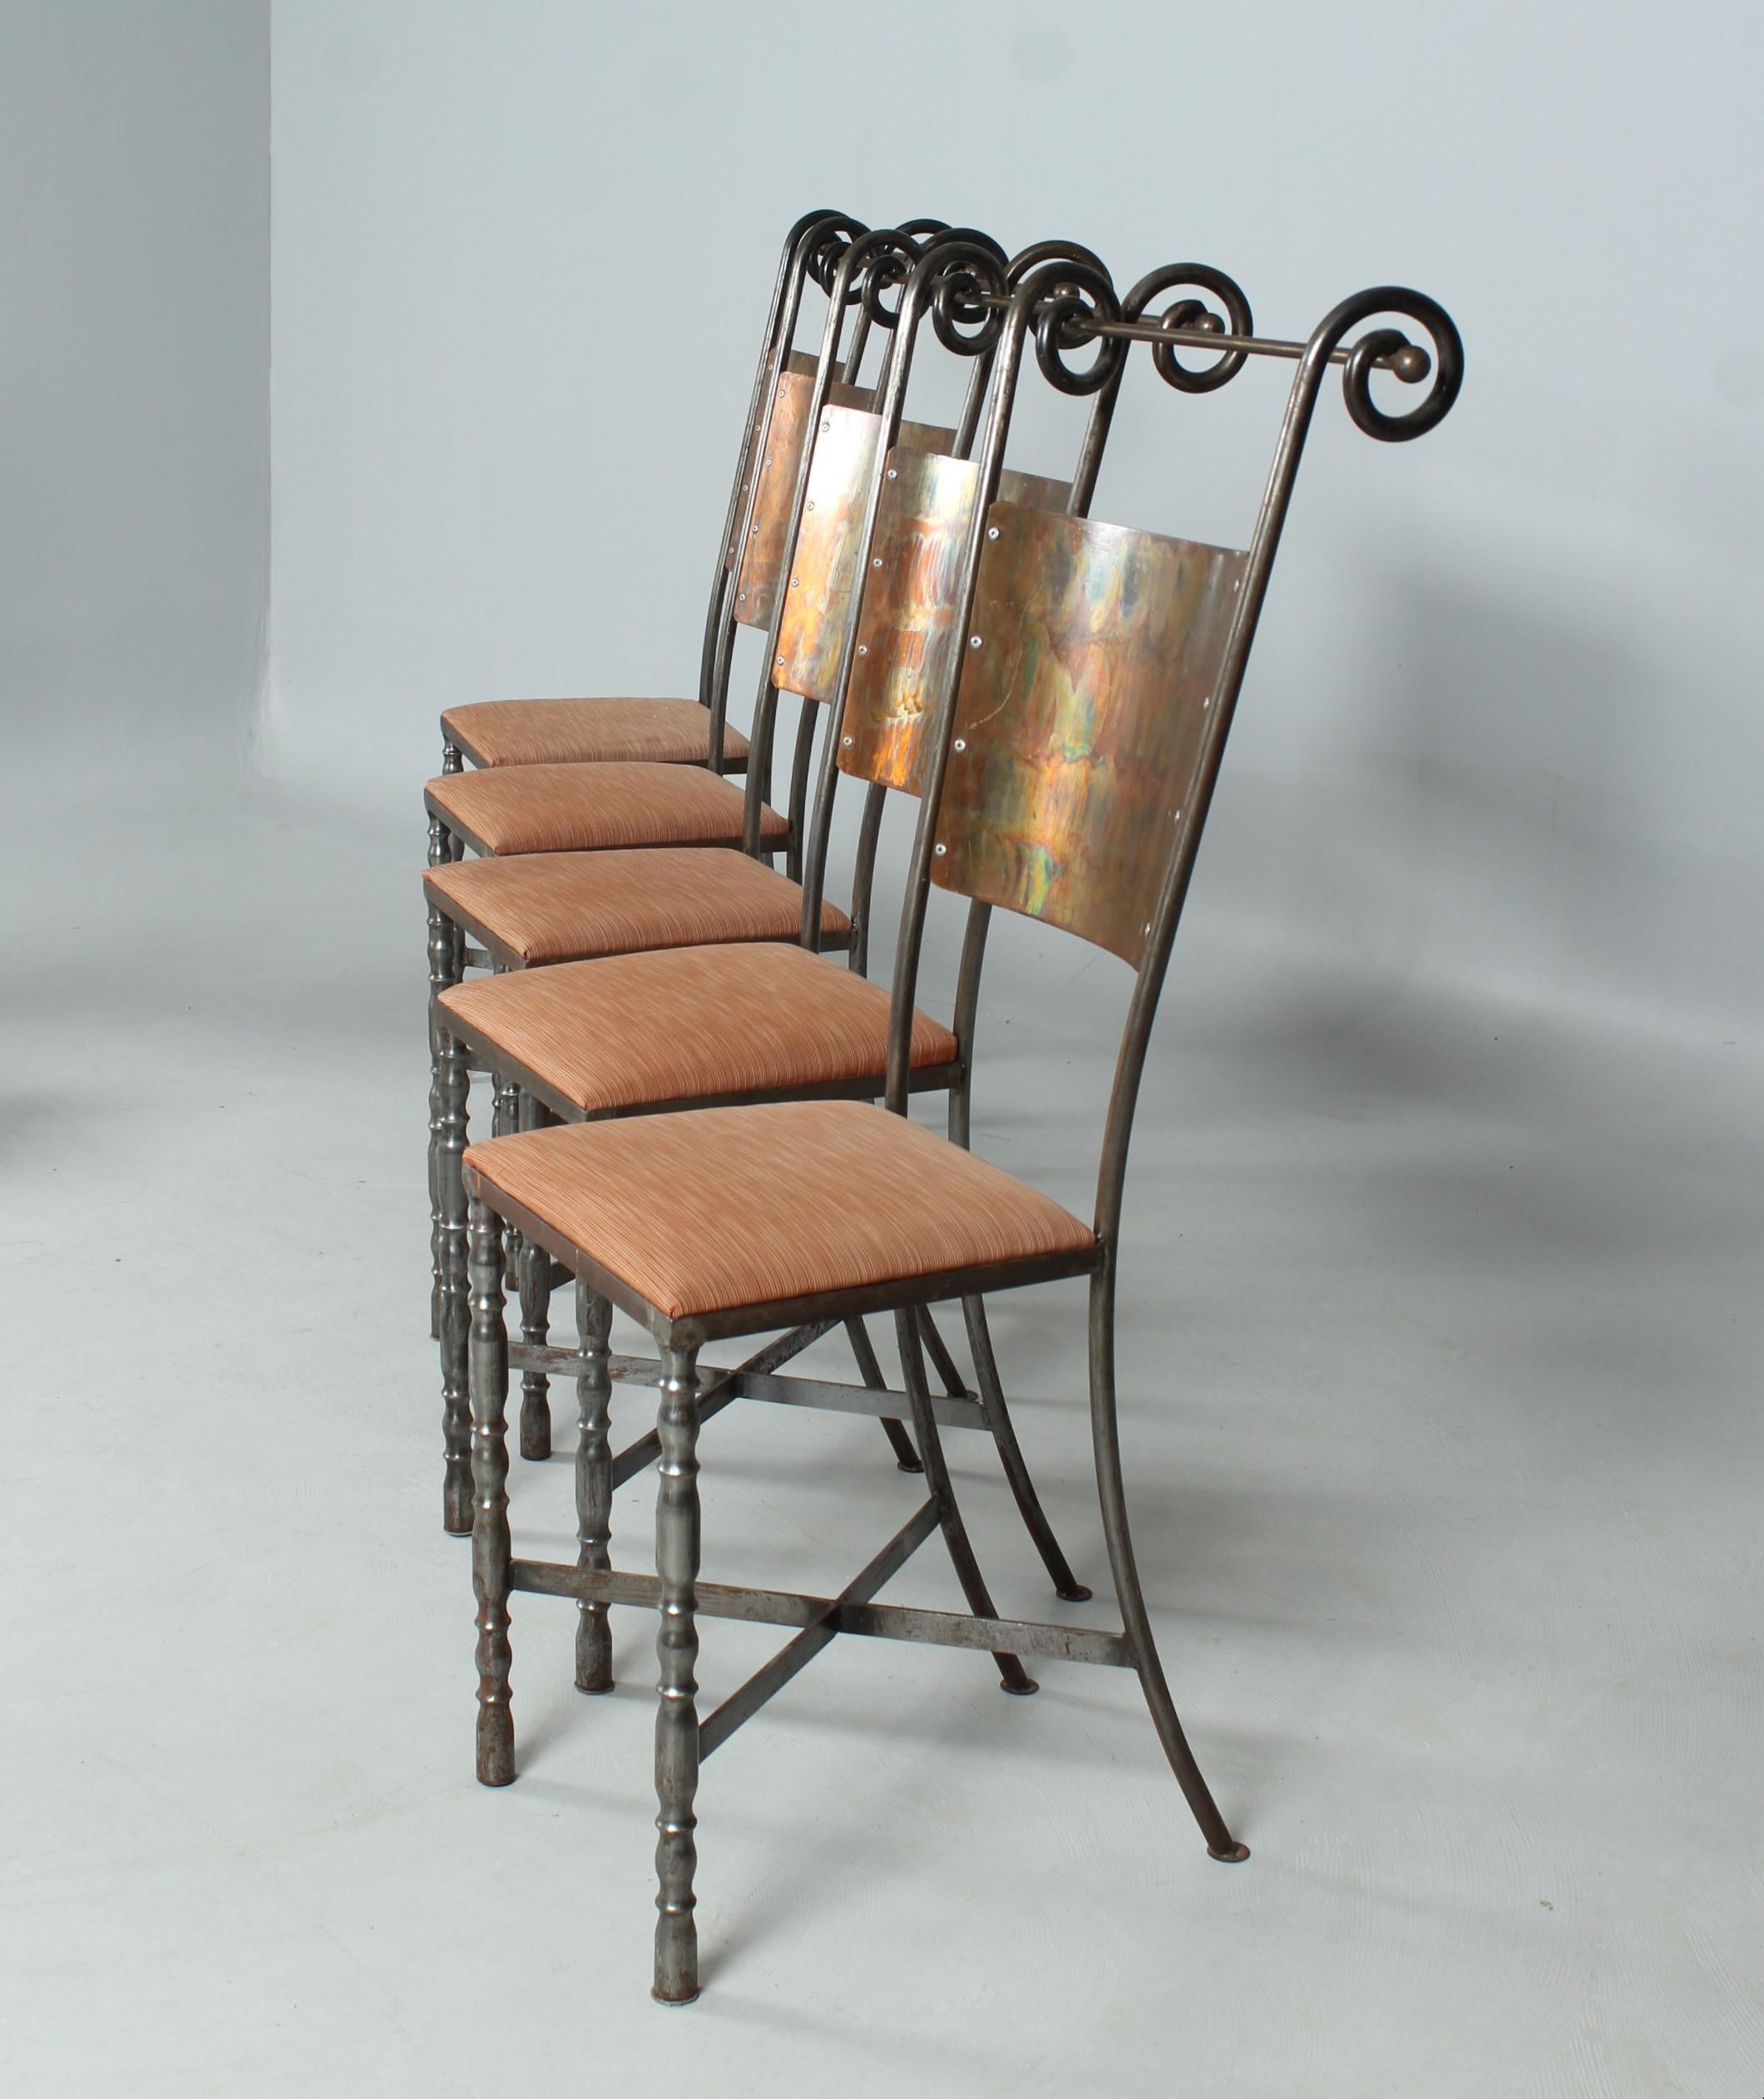 Italian Set of 8 Wrought Iron Chairs, Dining Chairs, 1980s? For Sale